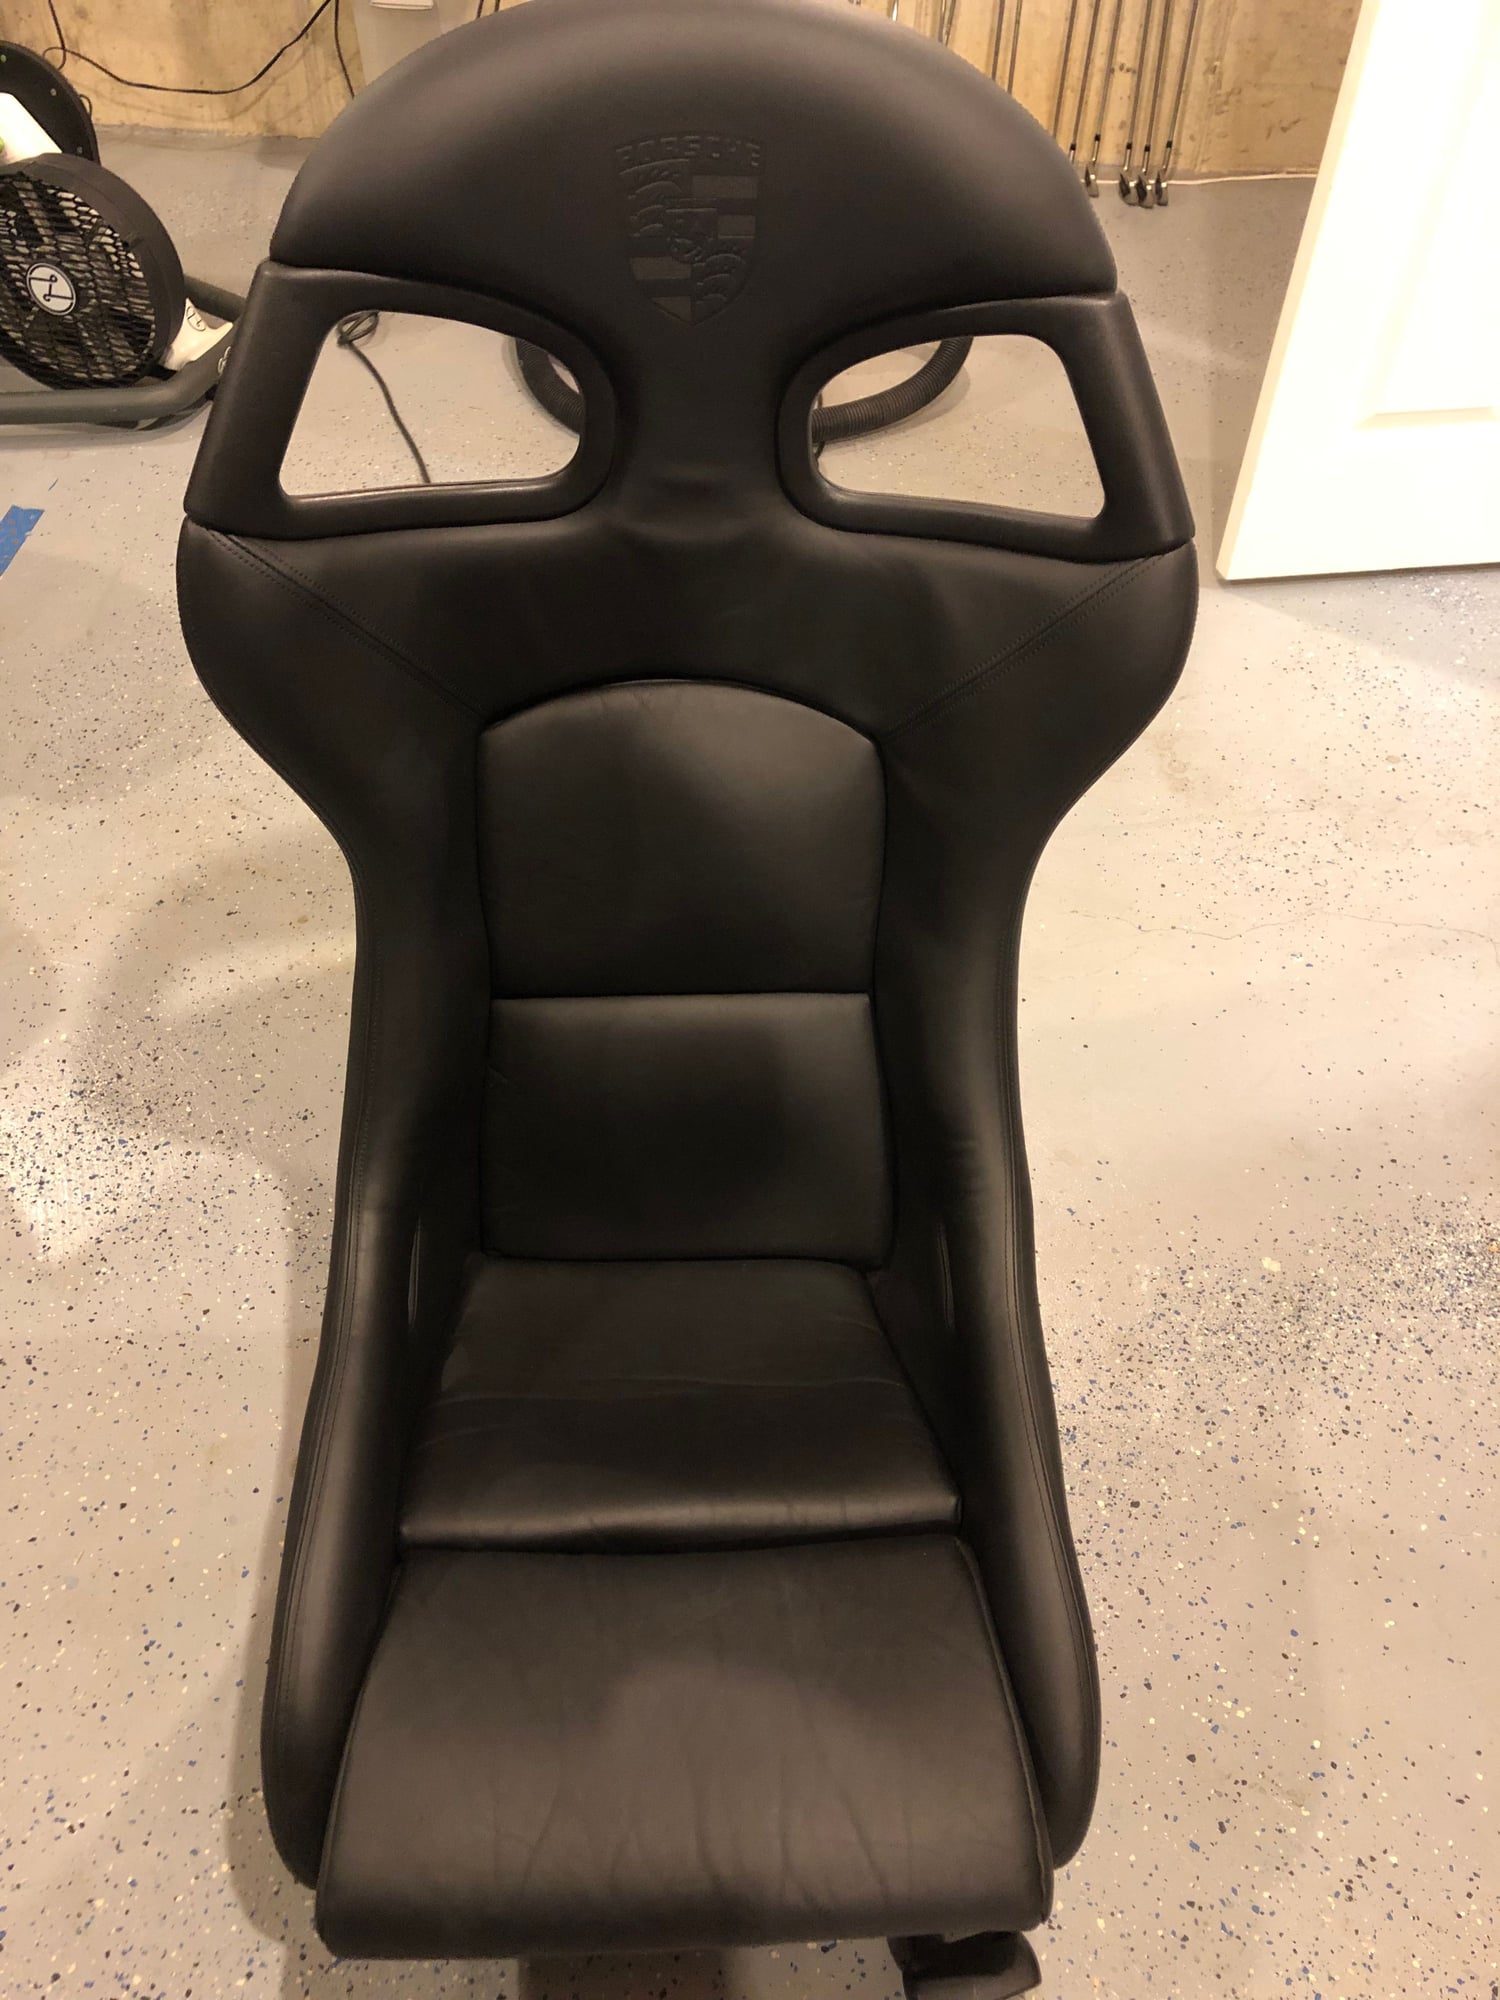 Interior/Upholstery - 996 GT3 Factory Euro Seats Black - Used - 2004 to 2011 Porsche All Models - Lake Forest, IL 60045, United States